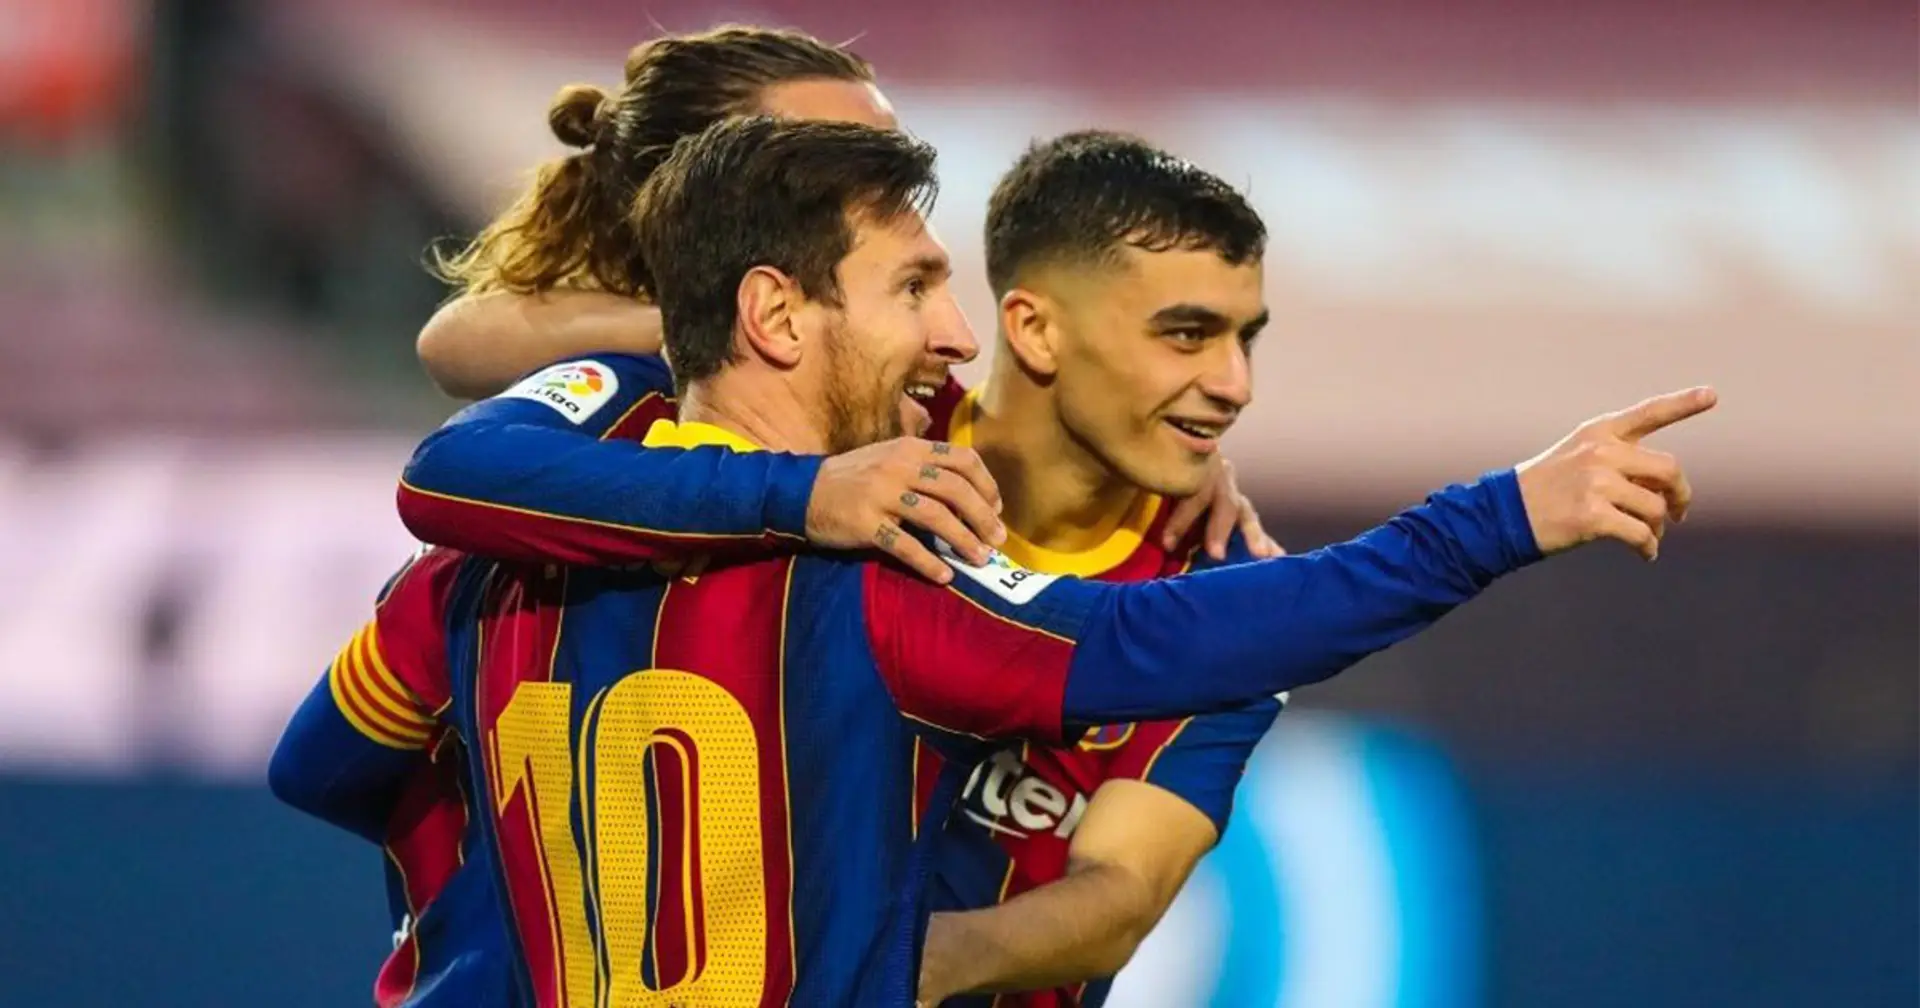 Messi and 2 more Barca players make top 10 list of La Liga leaders in expected assists in 2020/21